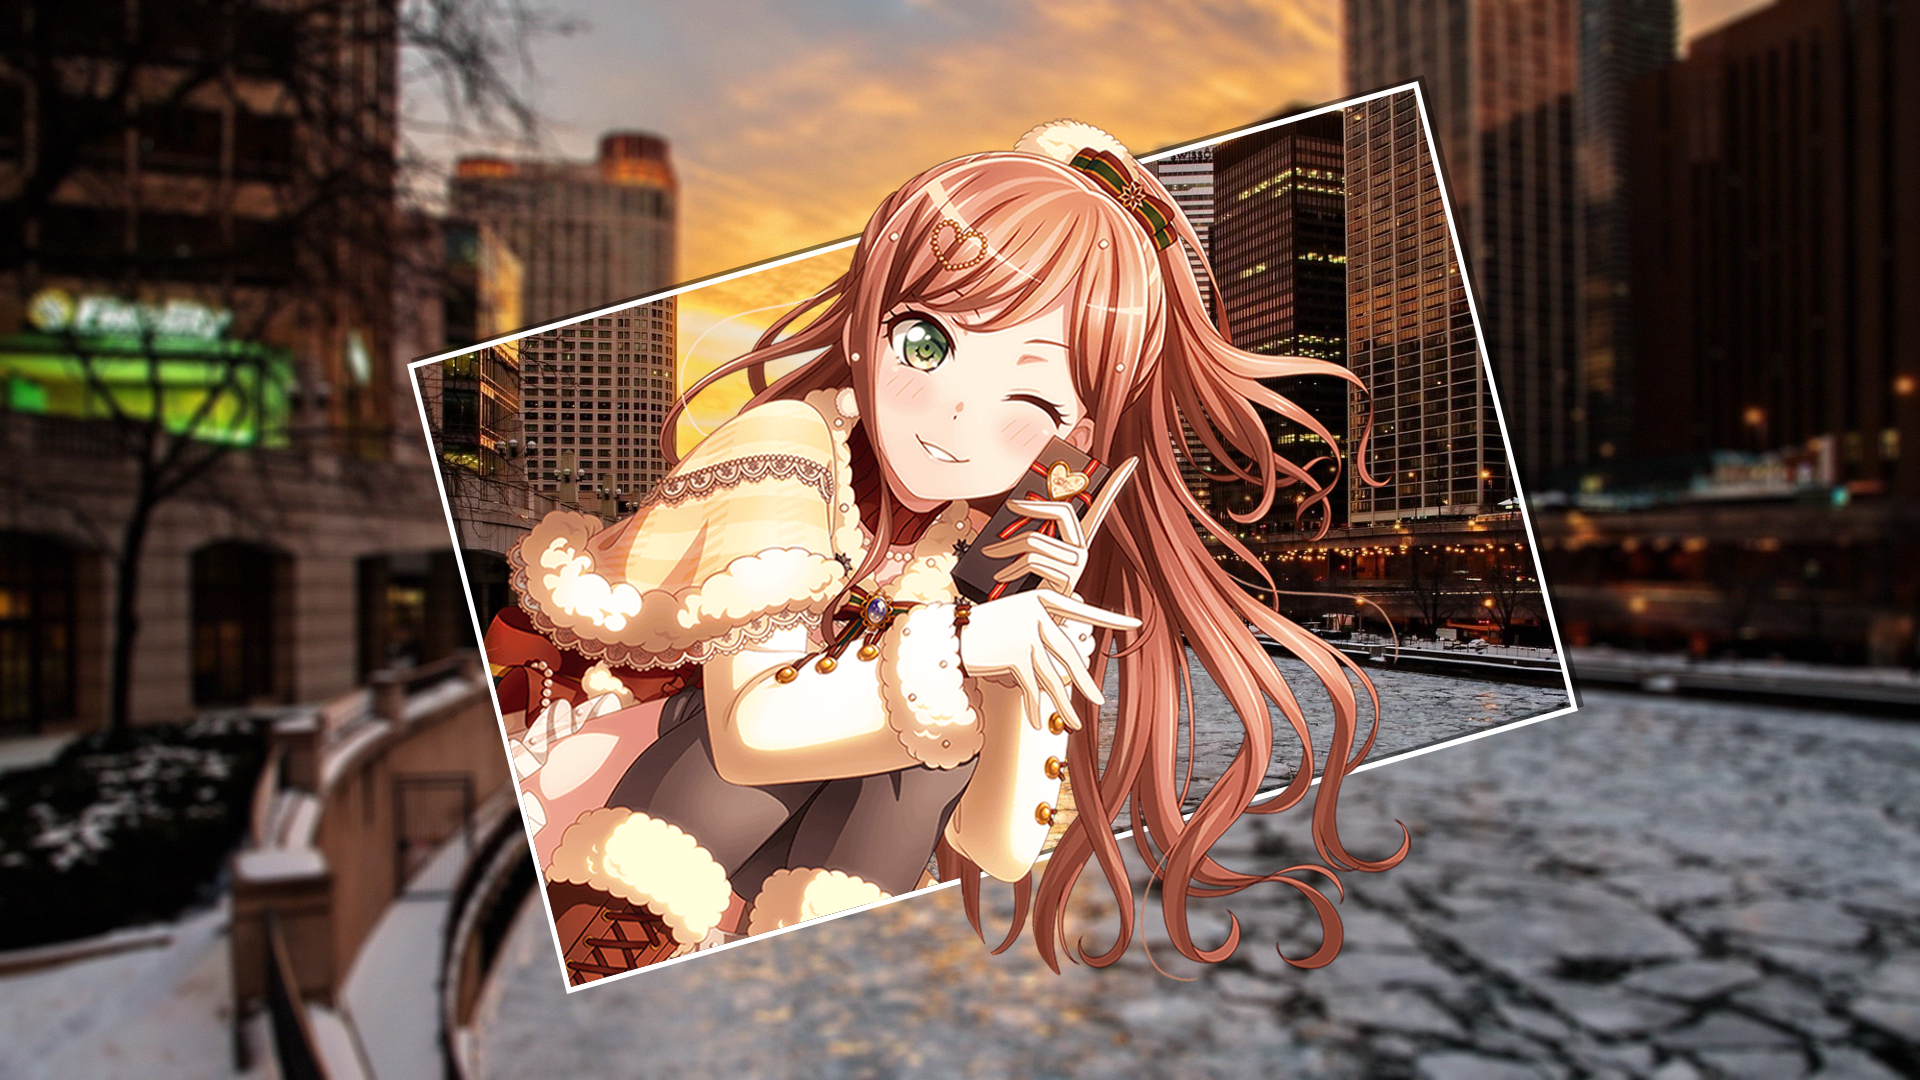 BanG Dream Imai Lisa Winter River City Picture In Picture 1920x1080